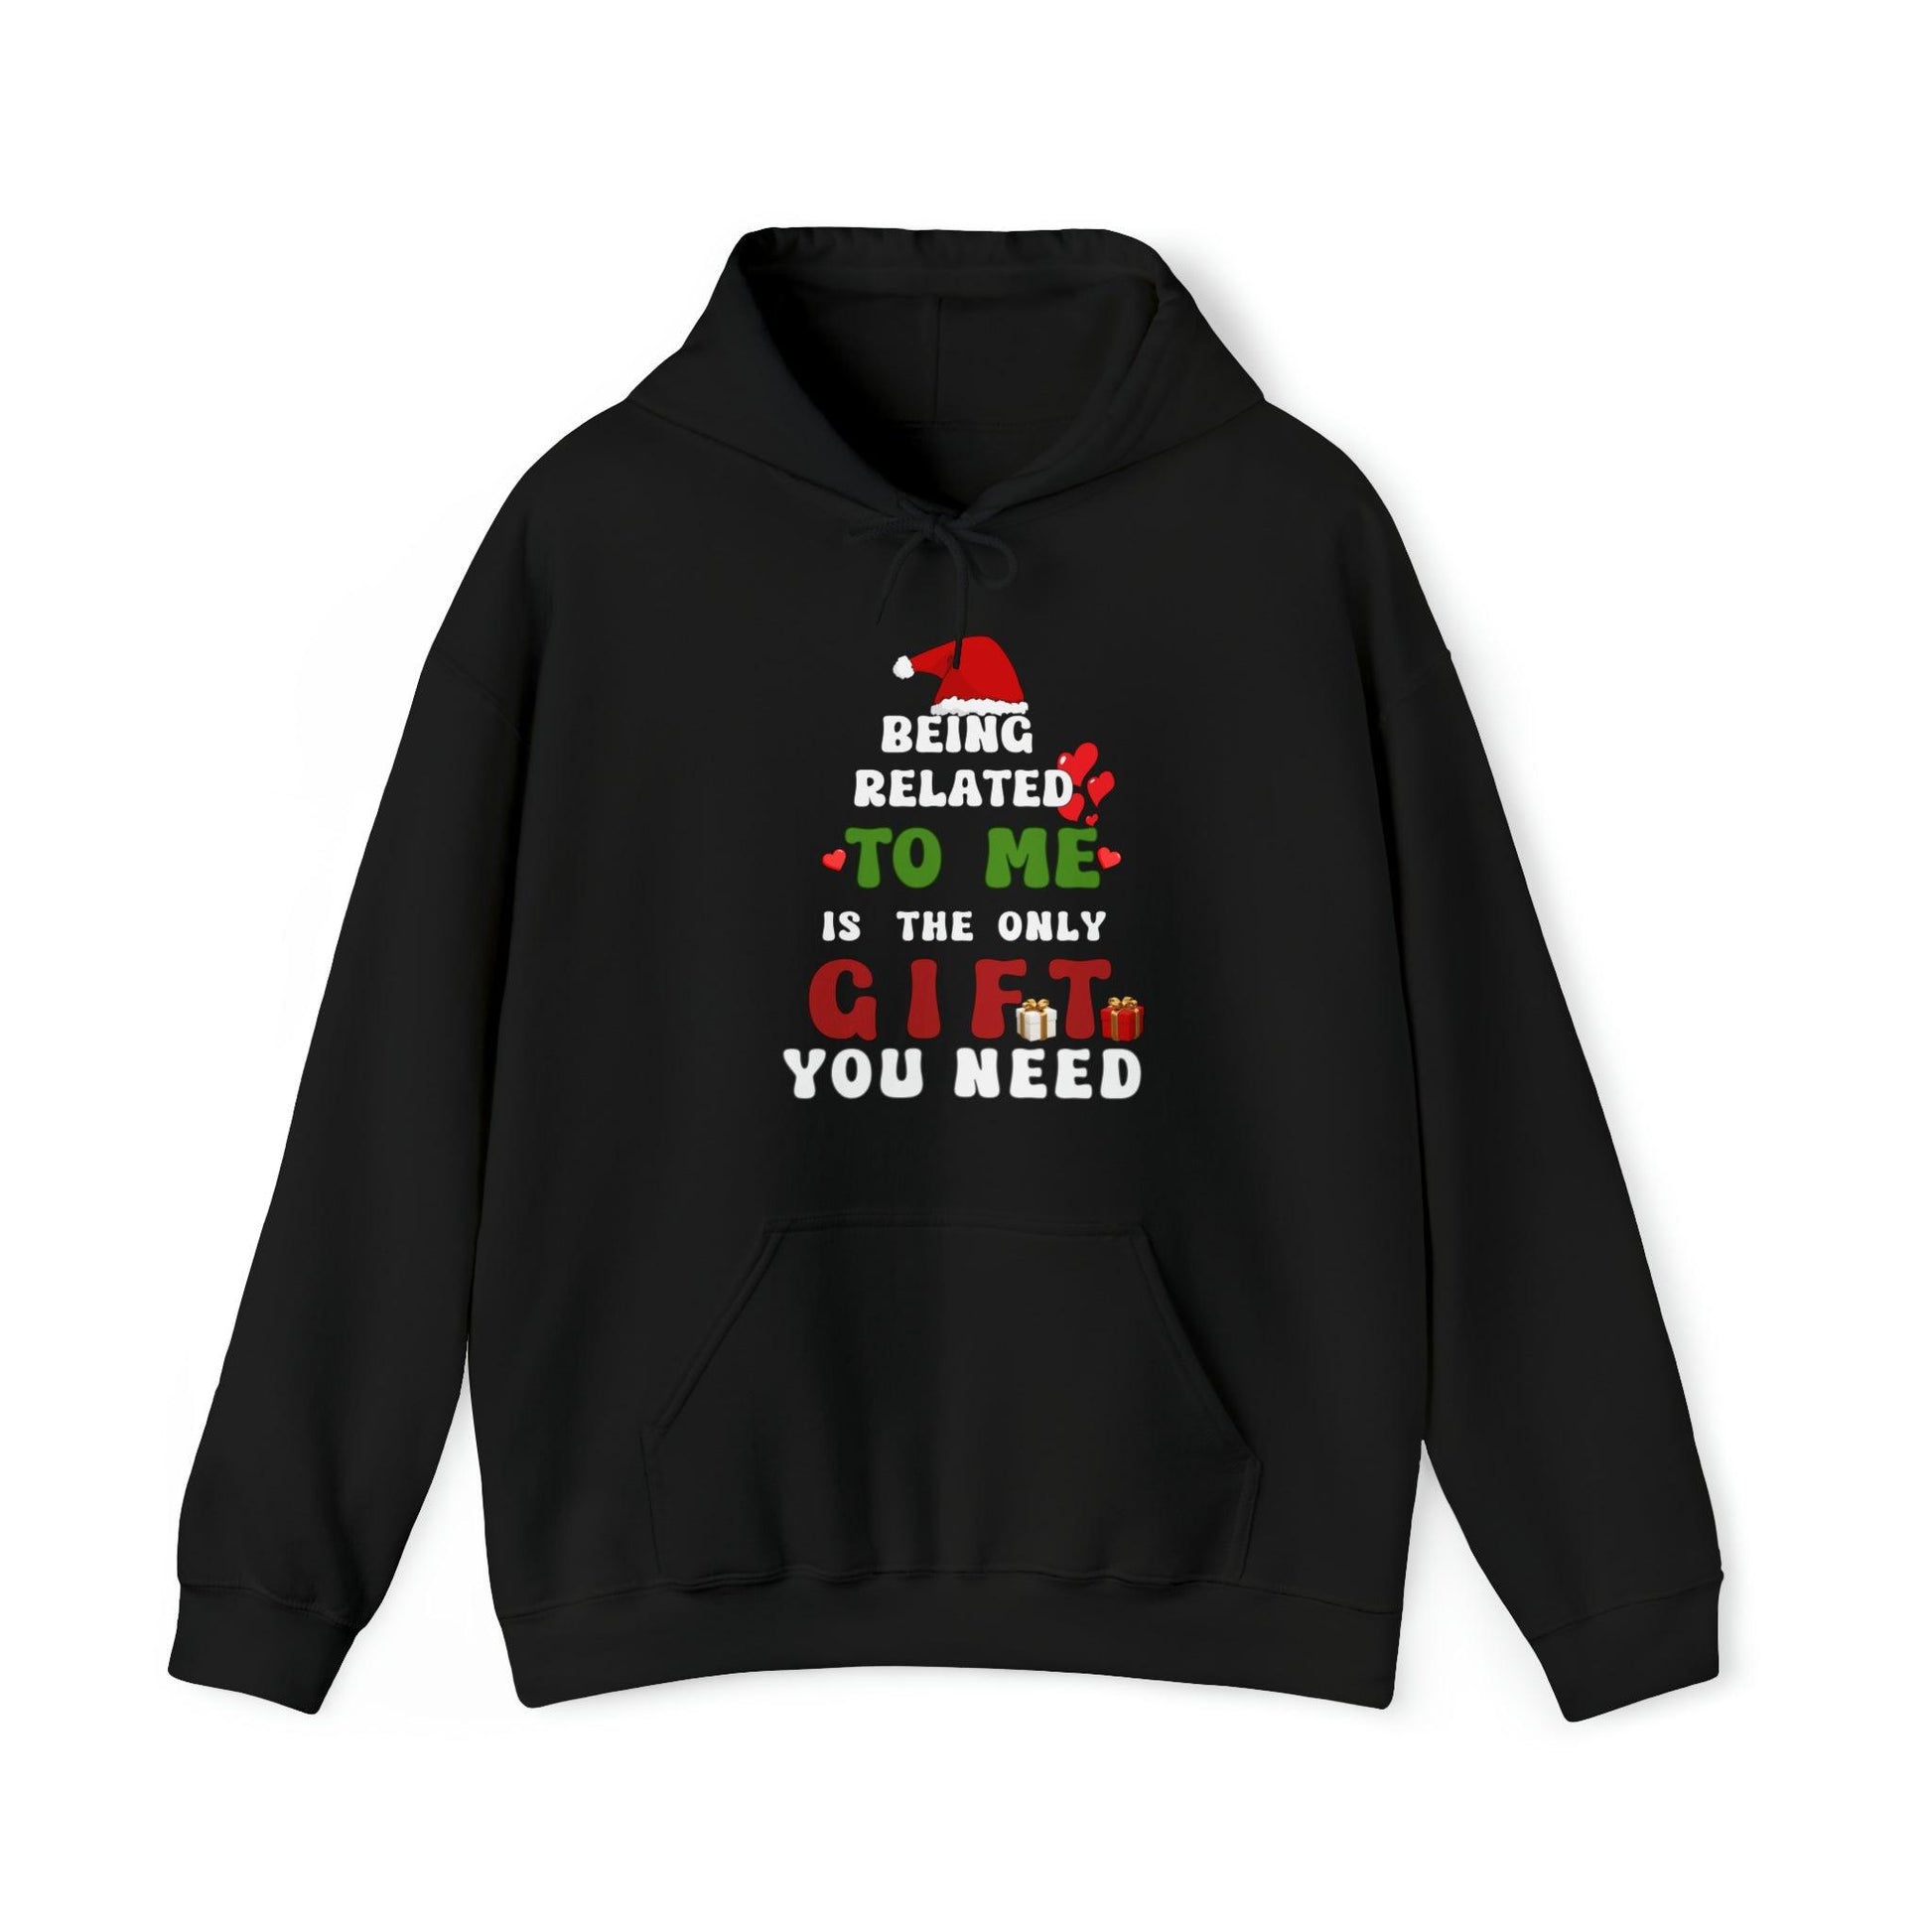 Christmas Vibe Hooded Sweatshirt Funny Christmas Trendy Shirt Funny Christmas Long Sleeve Tee Being Related To Me Is The Only Gift You Need Shirt Matching Shirts Christmas Gift Holiday Shirt Cute Christmas Sweatshirt Family Sweatshirt - Giftsmojo